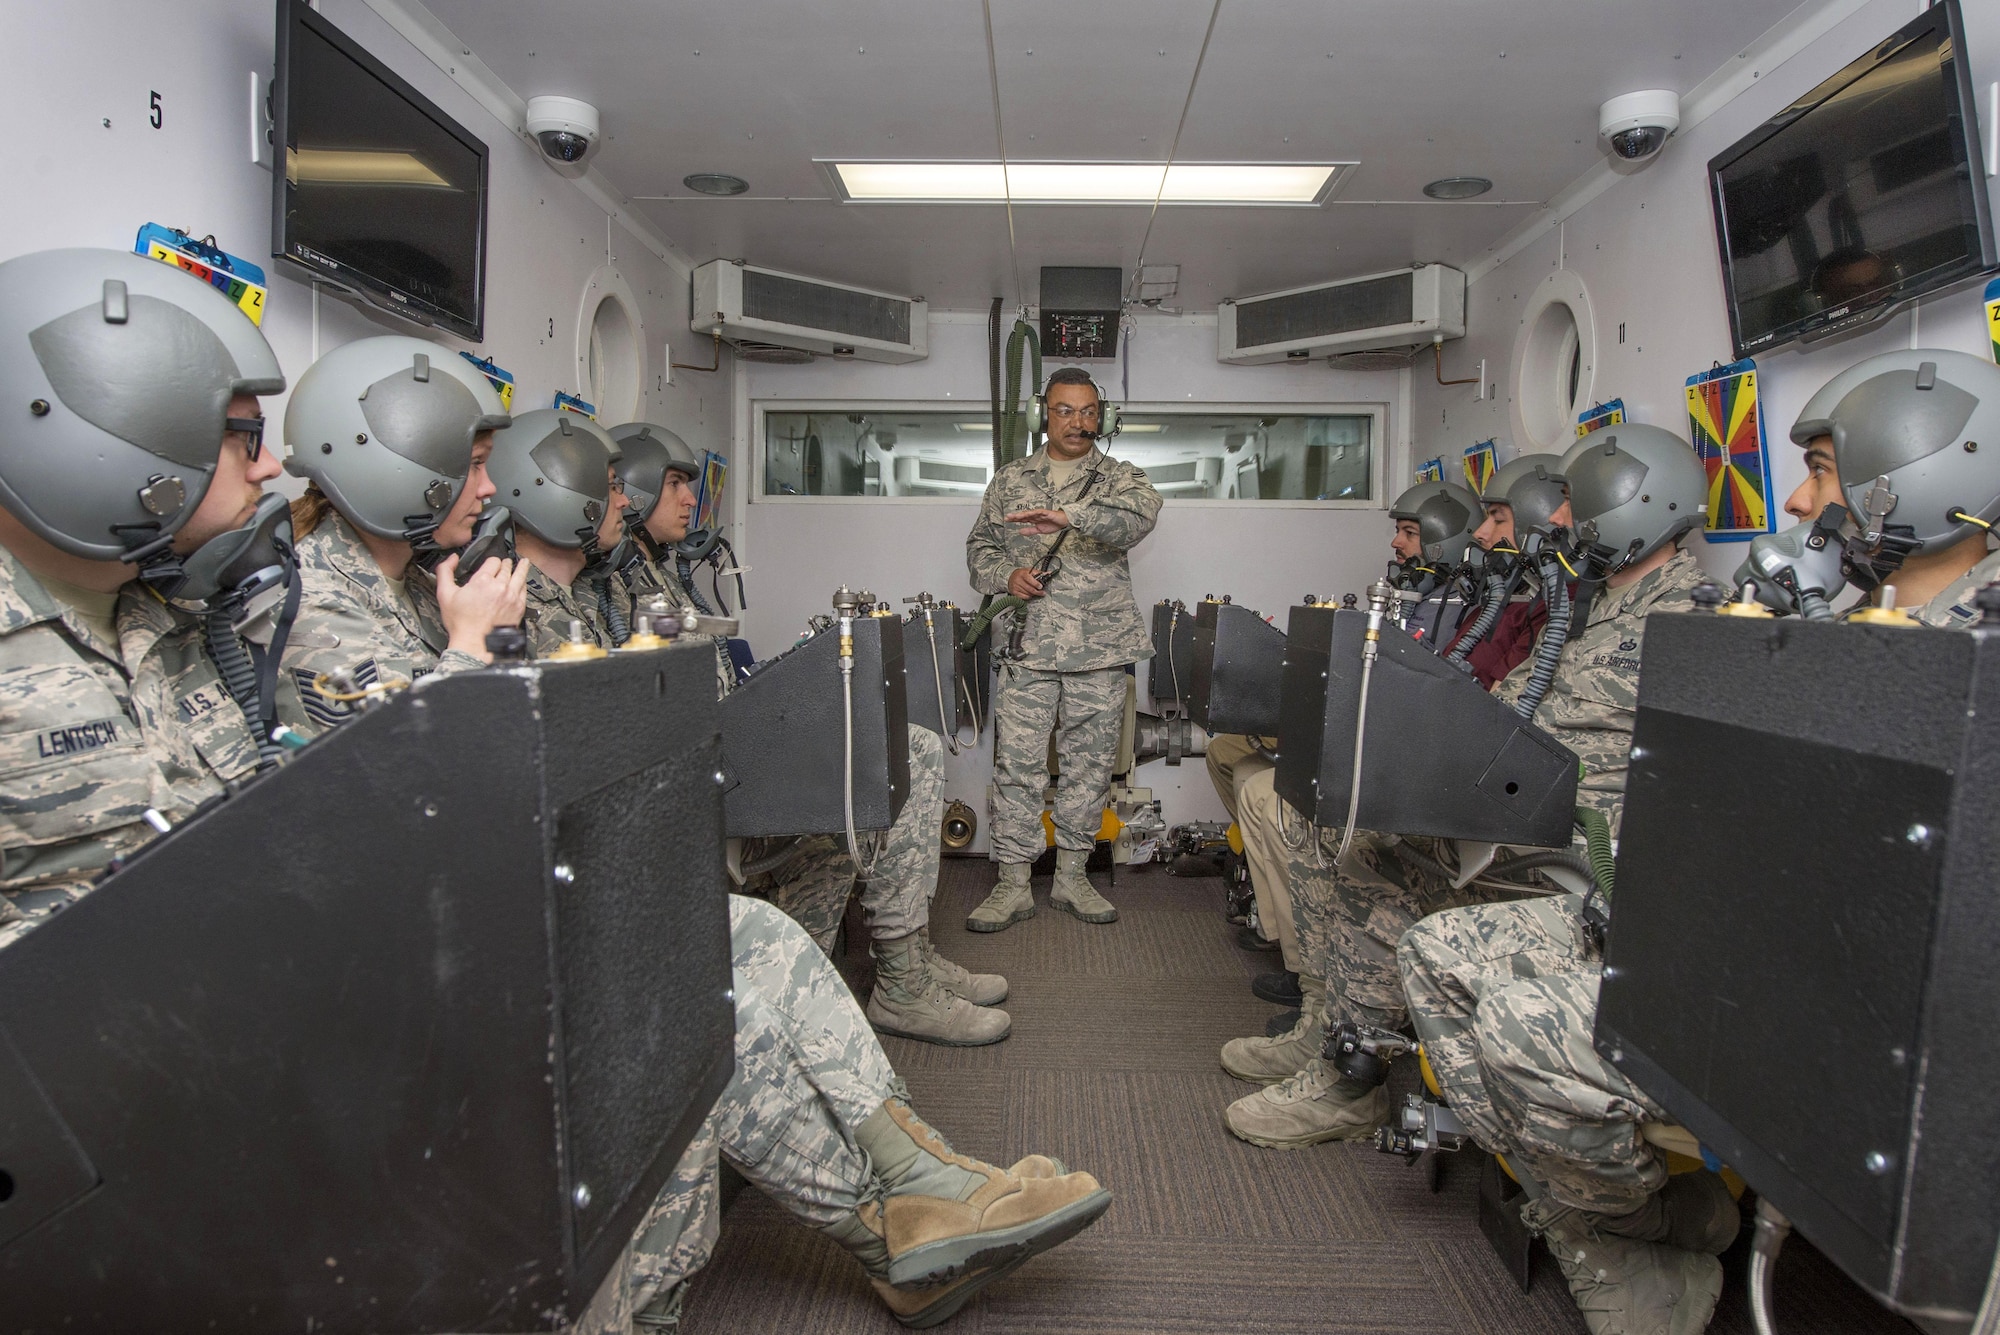 U.S. Air Force Senior Master Sgt. Paul Johal, School of Aerospace Medicine operational physiology superintendent, briefs students in the altitude hypobaric chamber about familiarizing themselves with the oxygen equipment for USAFSAM hypoxia demo training at Wright-Patterson Air Force Base, Ohio, April 26, 2017. The hypobaric chamber provides a training system which replicates the effects of barometric pressure change on the human body. (U.S. Air Force photo/Michelle Gigante)